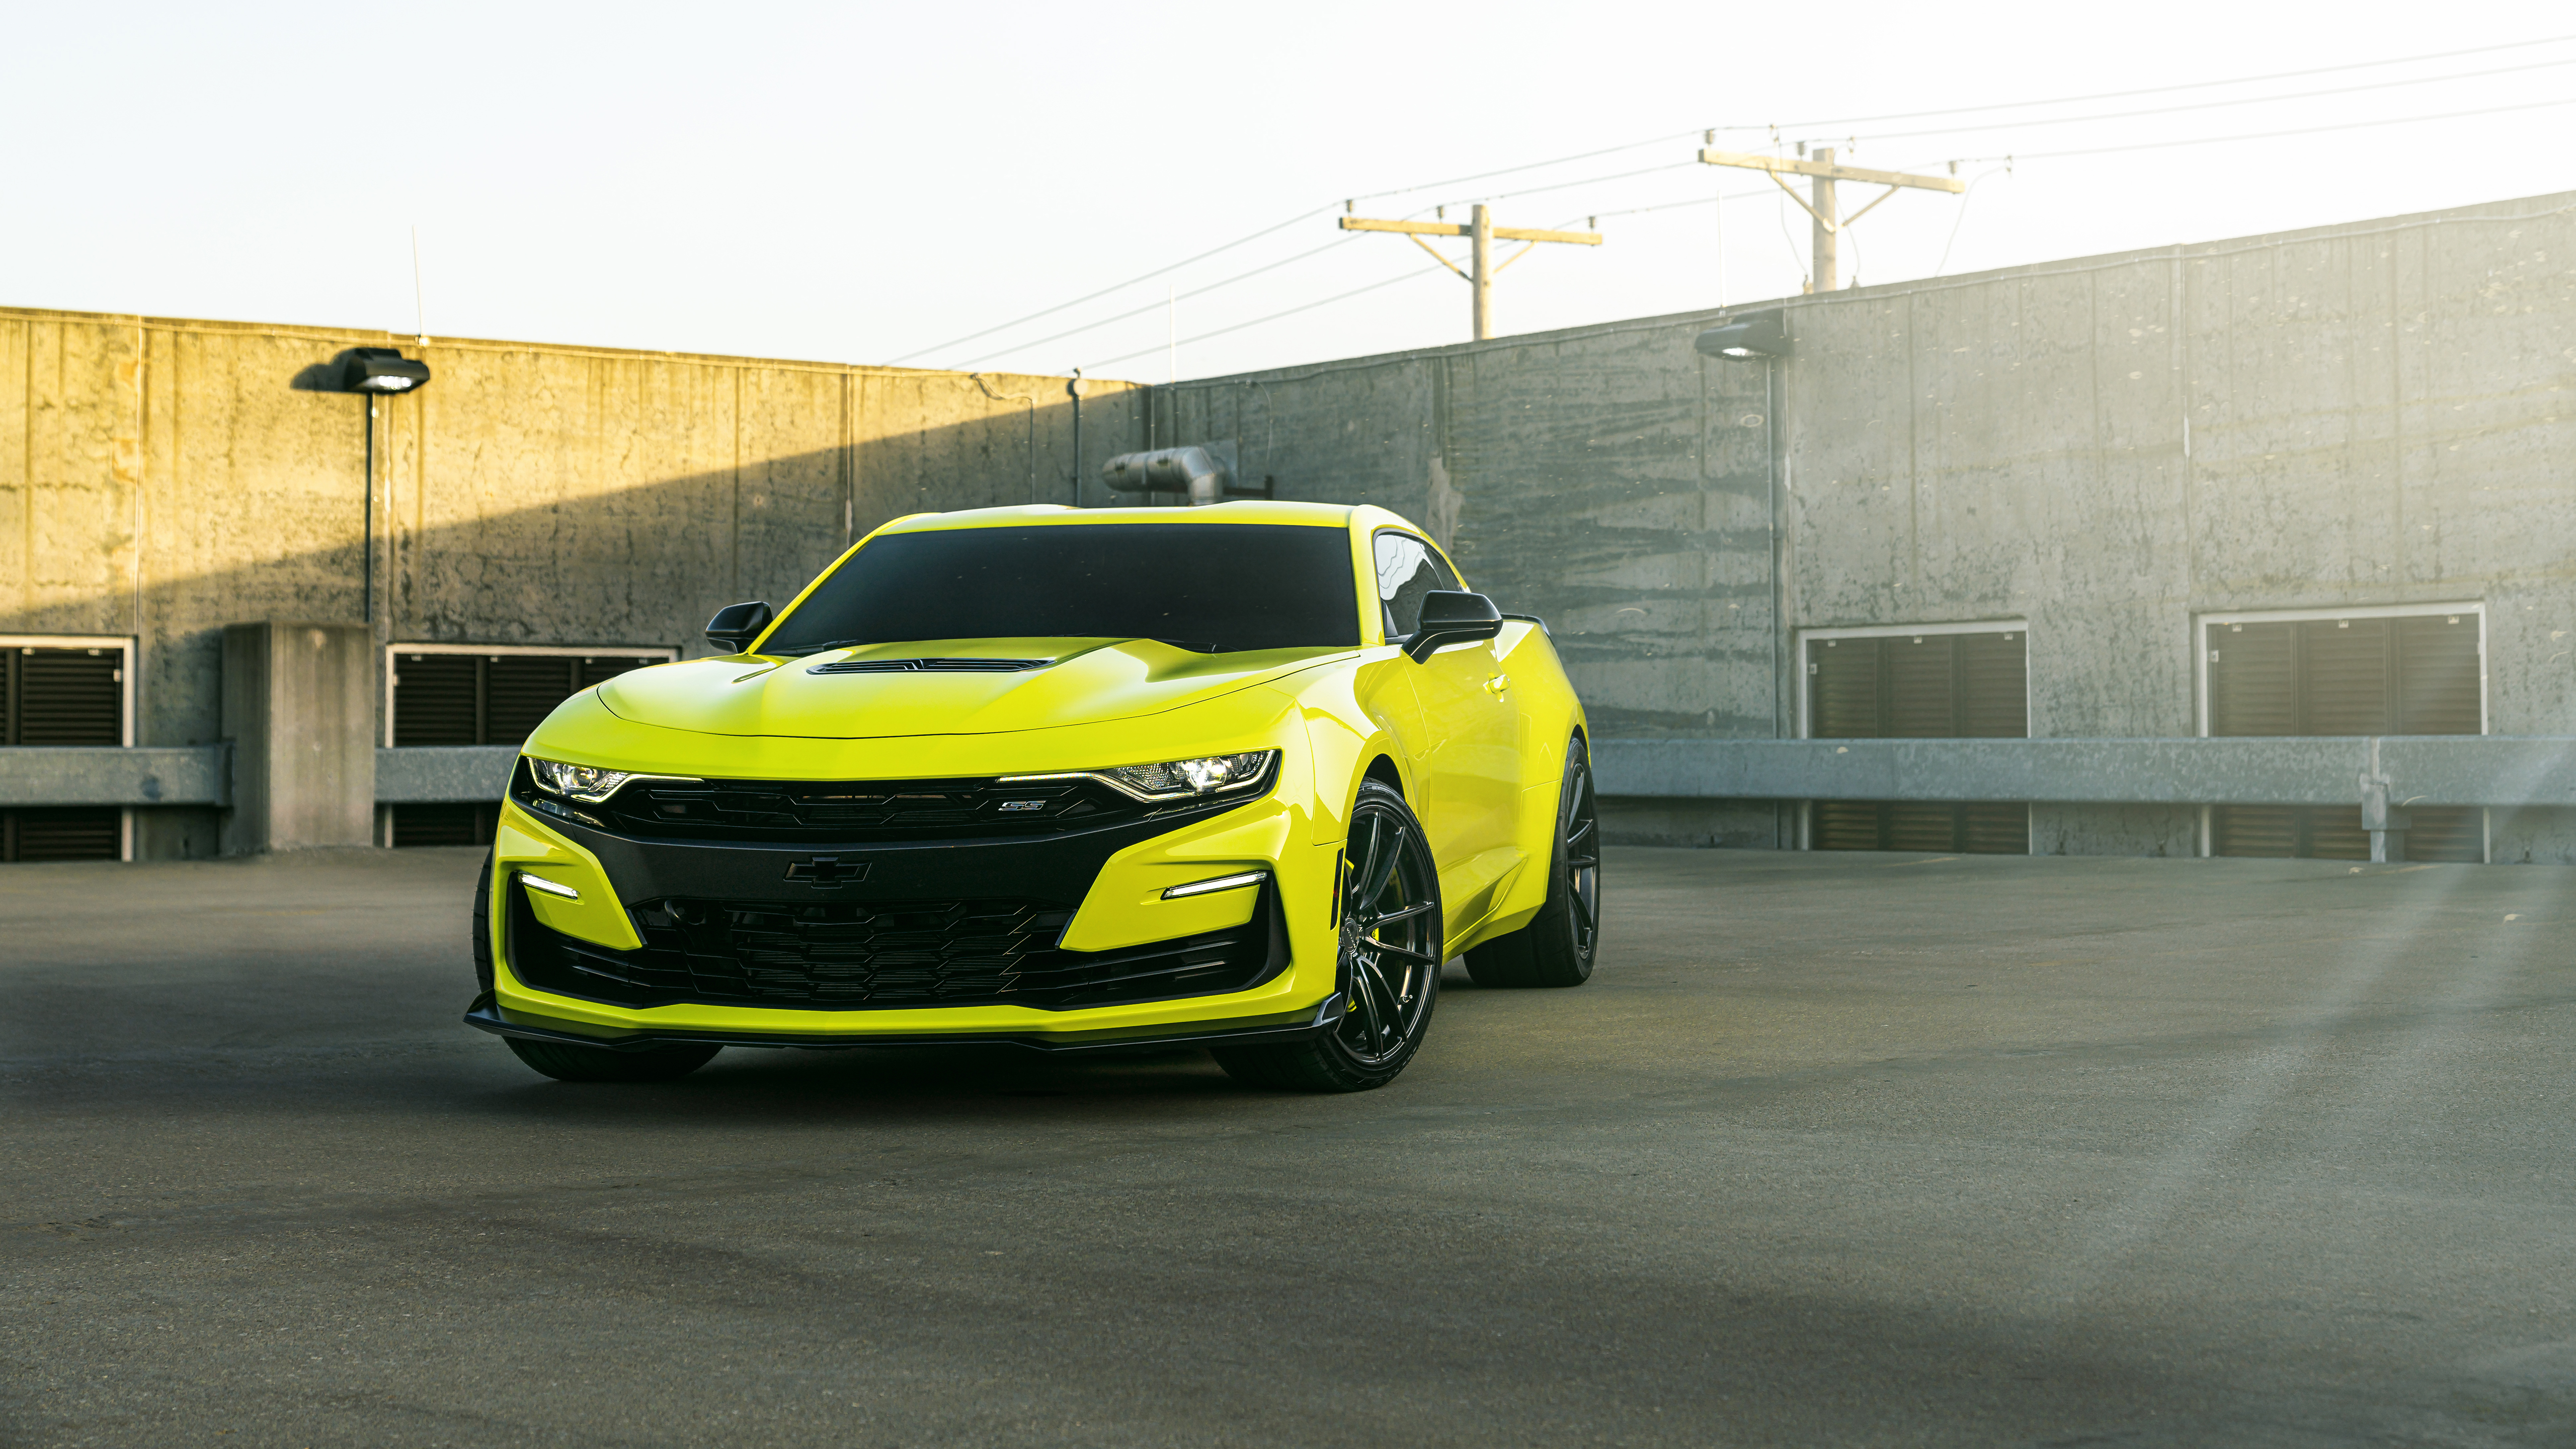 General 5120x2880 Chevrolet Camaro car vehicle yellow cars muscle cars